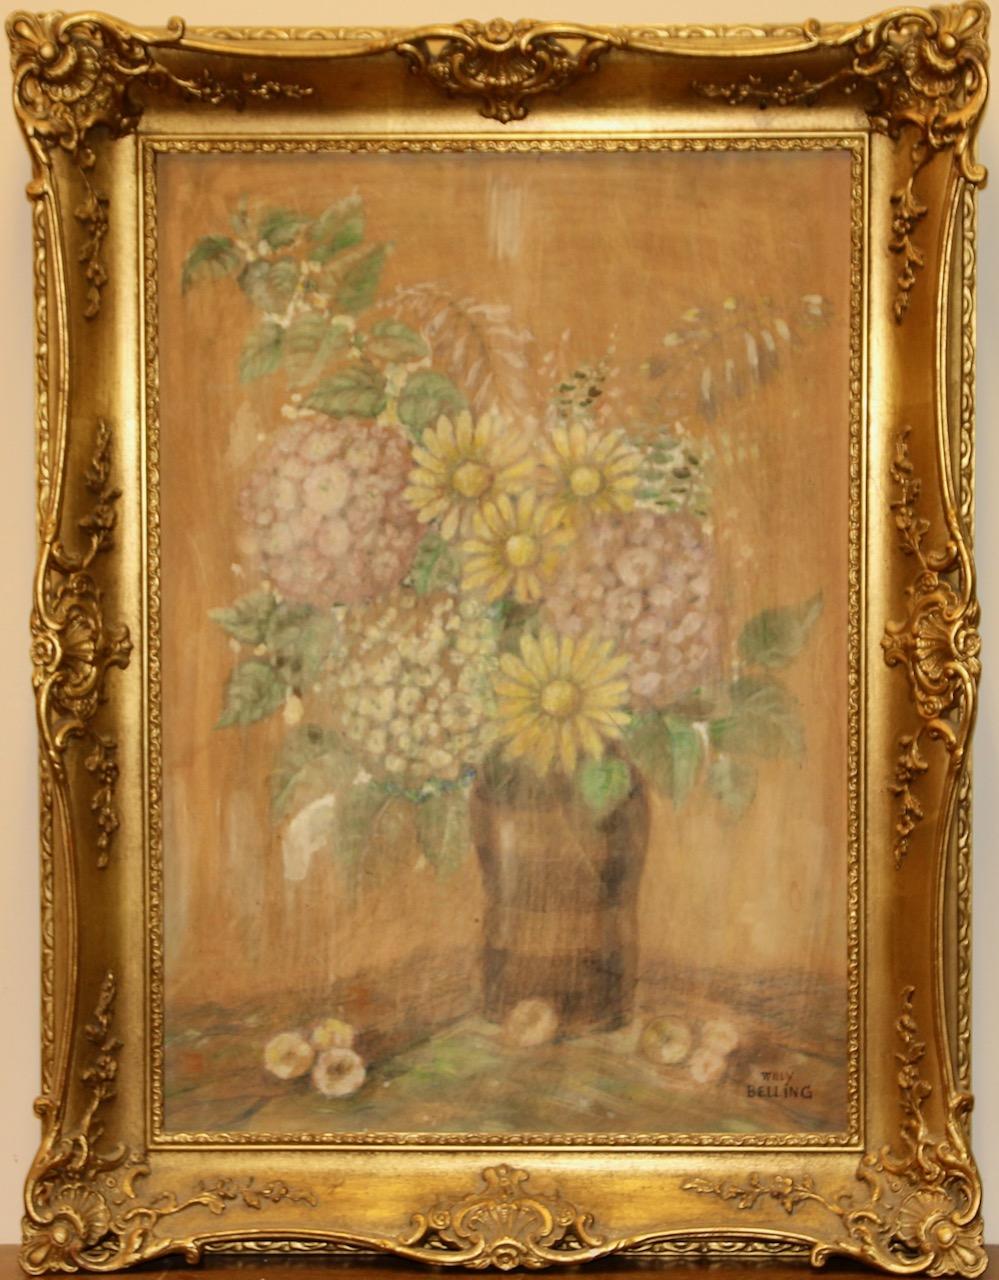 Antique Oil Paintig by Willy Belling, Still Life with Flower Vase

Signed lower right. Dimension measured with frame.

Frame slightly damaged.